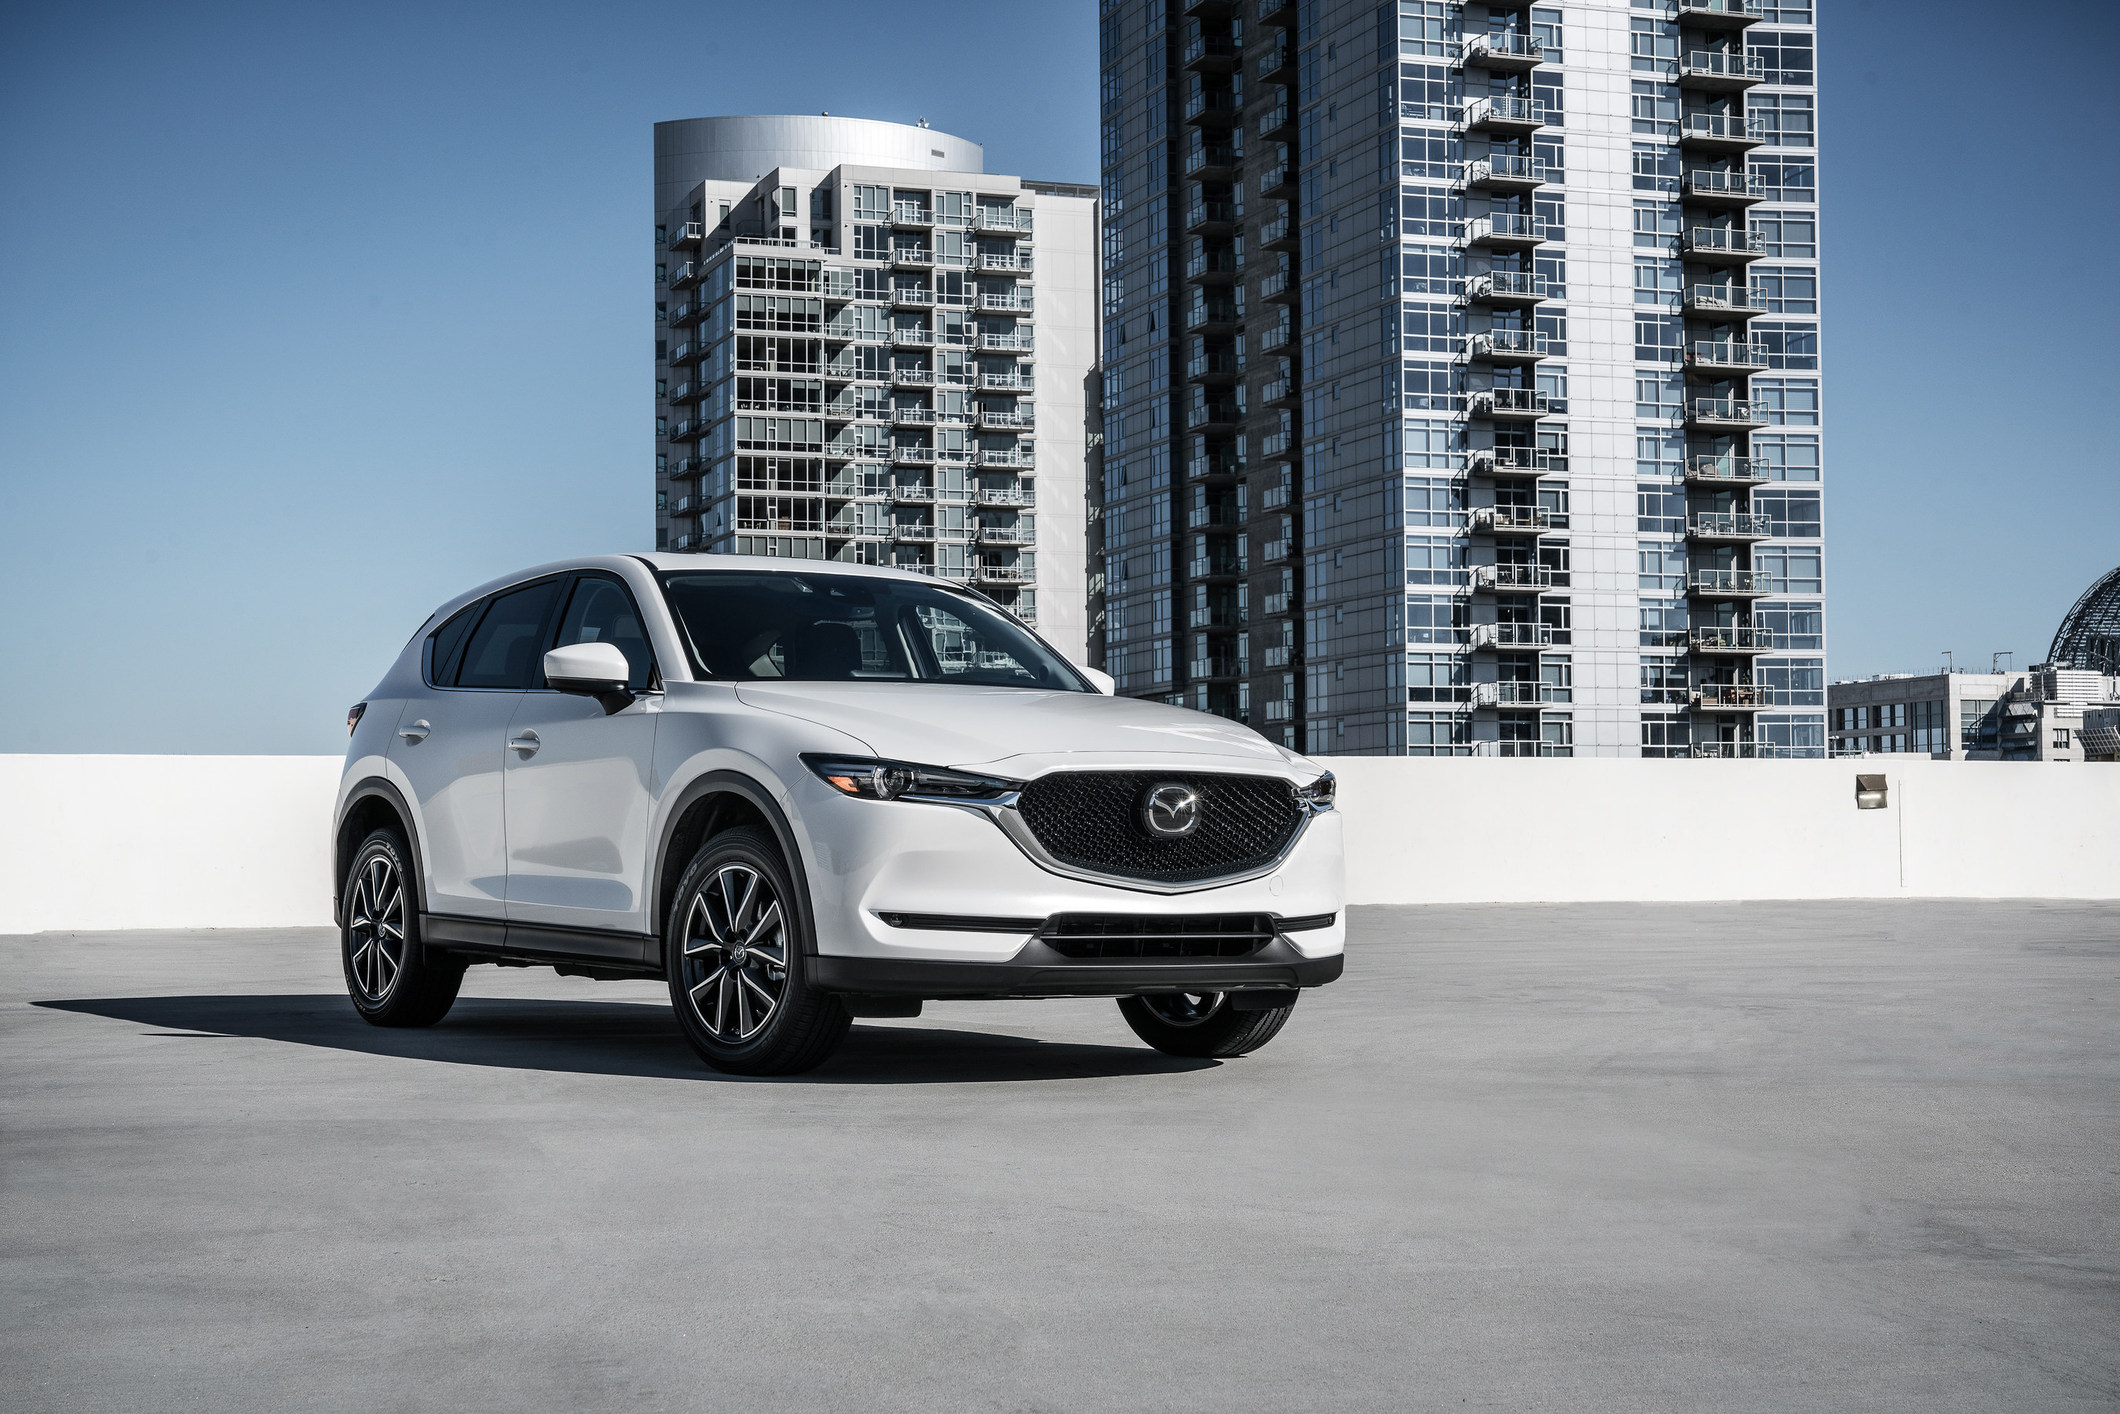 2017 Mazda CX5 Priced from MSRP of 24,045